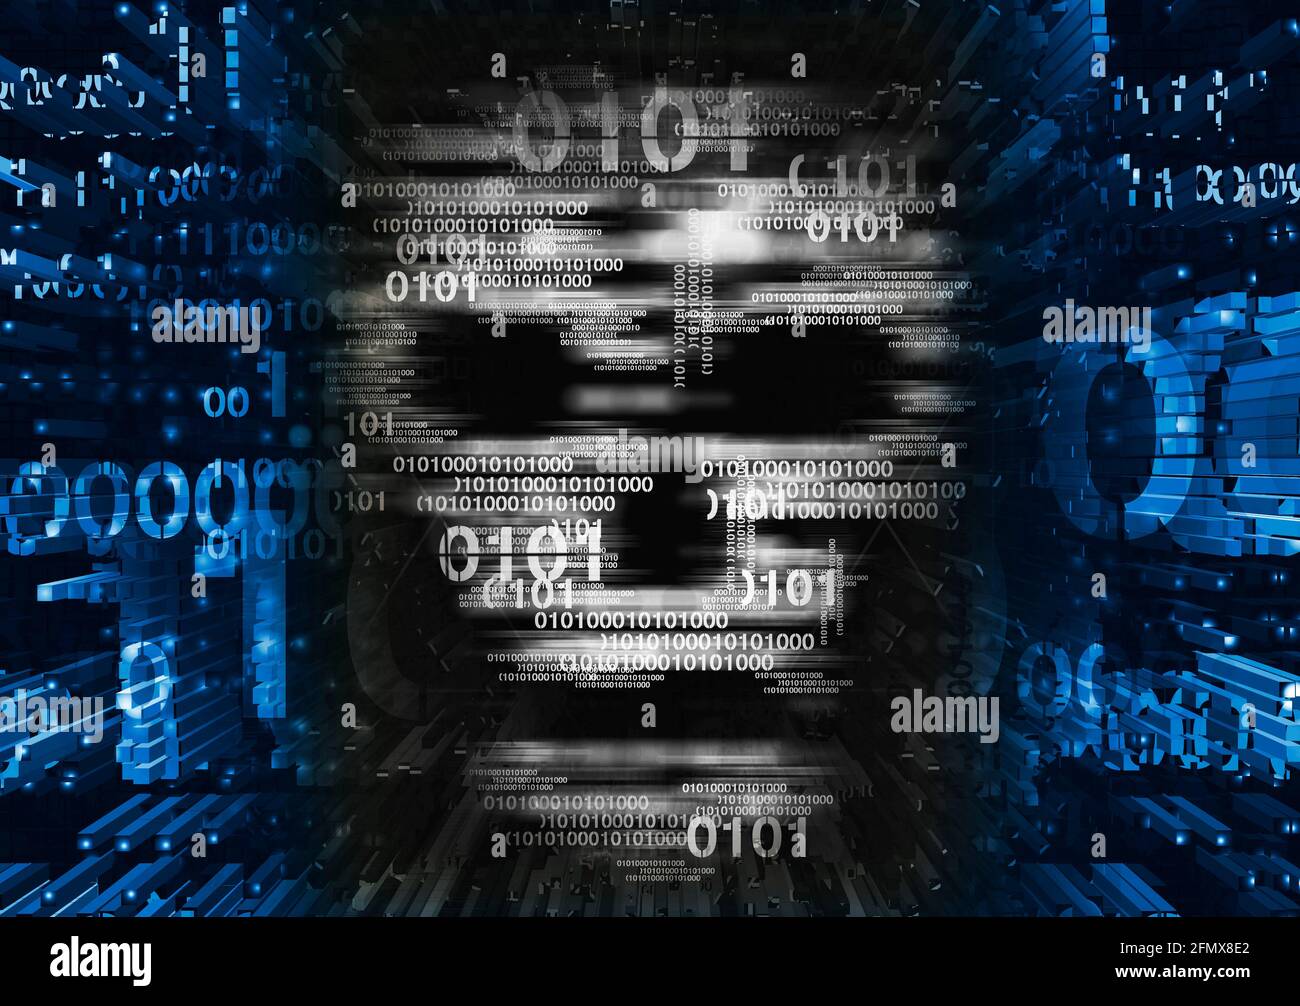 Skull,Hacker,Computer virus concept. Illustration of Abstract Skull sign with blue binary code. Web Hacking. Online piracy concept. Stock Photo